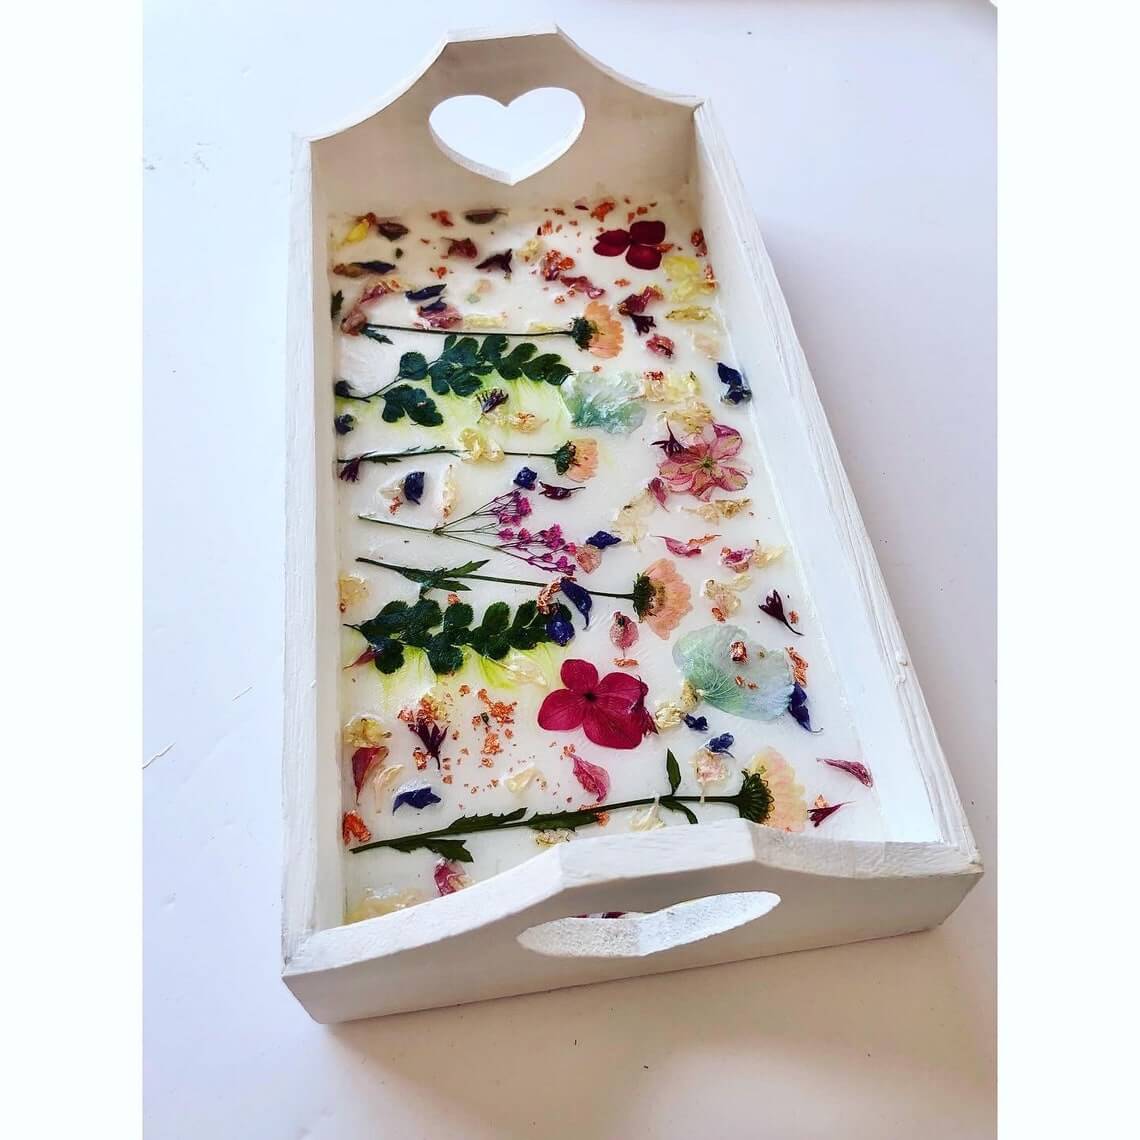 Colorful Homemade Decorative Floral Tray